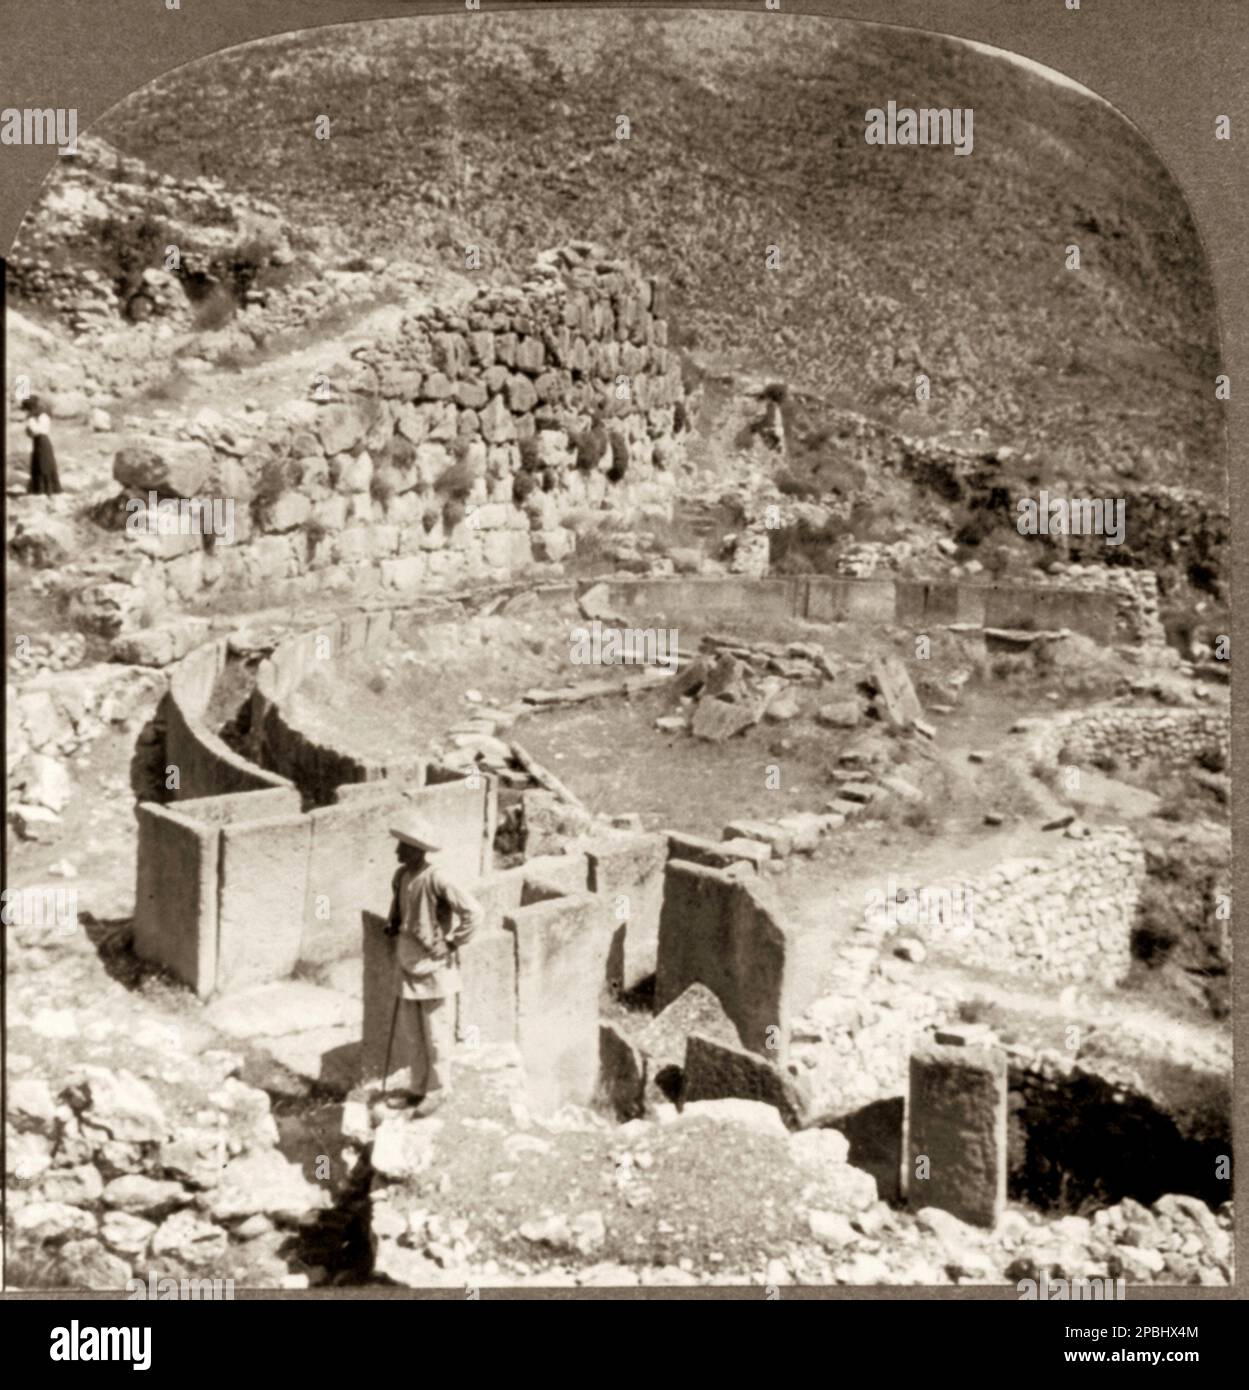 1906 : Circular royal tombs of Mycenae , Greece.  Stereotype photo by Keystone View Co., USA . The german archeologist HEINRICH SCHLIEMANN ( 1822 in Neubukow, Mecklenburg-Schwerin -  1890 in Naples , Italy ) was a German treasure hunter, an advocate of the historical reality of places mentioned in the works of Homer, and an important excavator of Troy and of the Mycenaean sites Mycenae and Tiryns . - FOTO STORICHE - HISTORY - OMERO - TROIA - MICENE - GEOGRAFIA - GEOGRAPHY  - ARCHITETTURA - ARCHITECTURE - ARCHEOLOGIA - ARCHEOLOGY - Grecia - Greece - ART - ARTS   ----  Archivio GBB Stock Photo